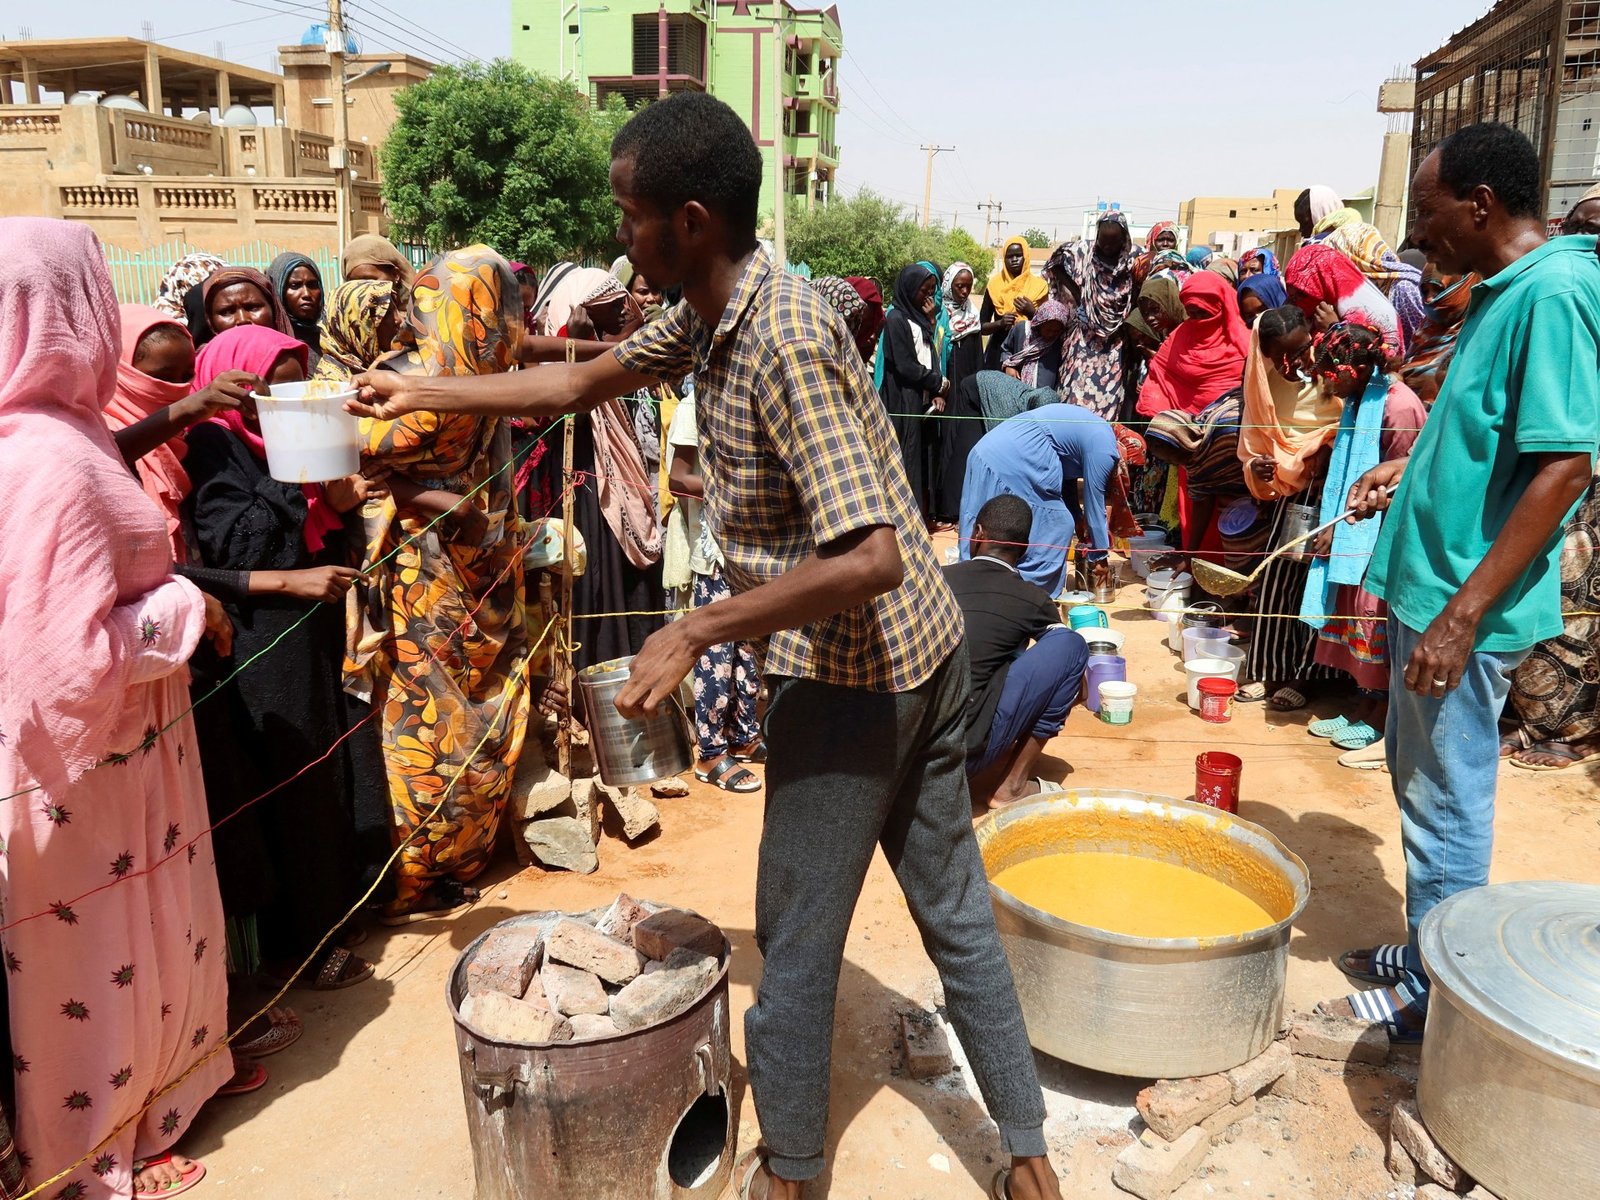 People ‘dying of starvation’ in Sudan, UN food agency says | Hunger News